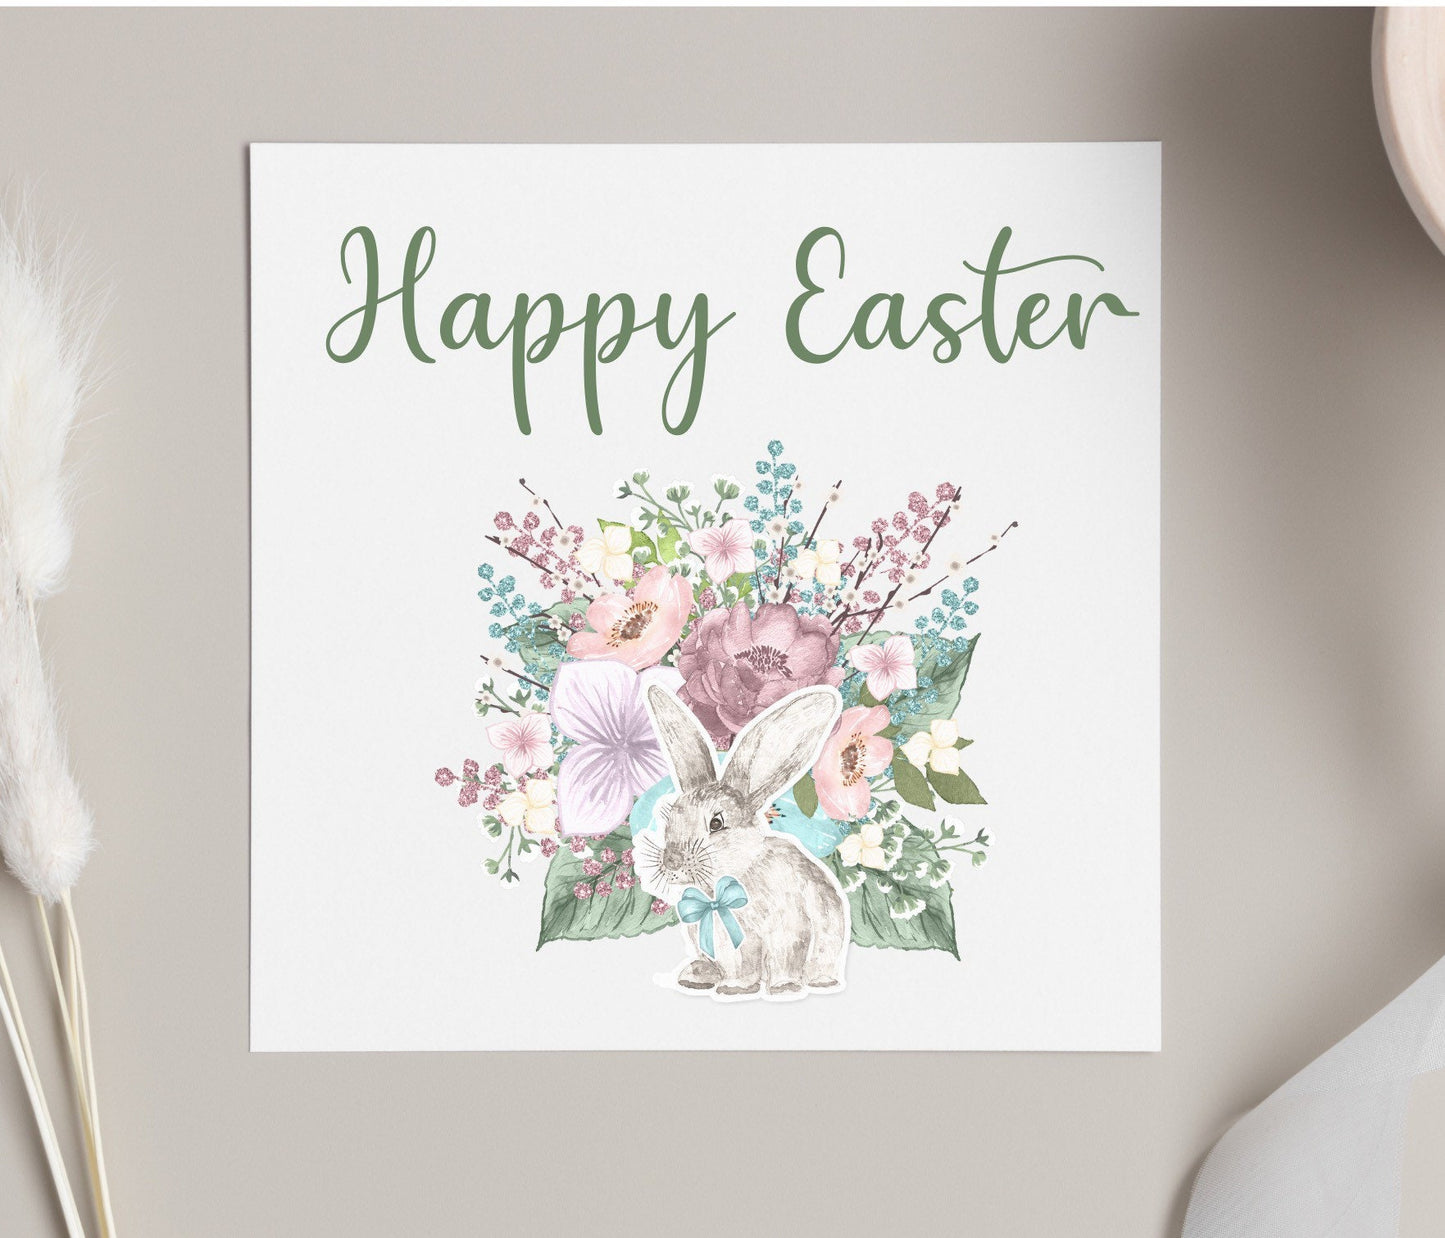 Happy Easter Greetings card, bunny rabbit floral design Easter card for children and adults, spring cards, botanical cards for Easter